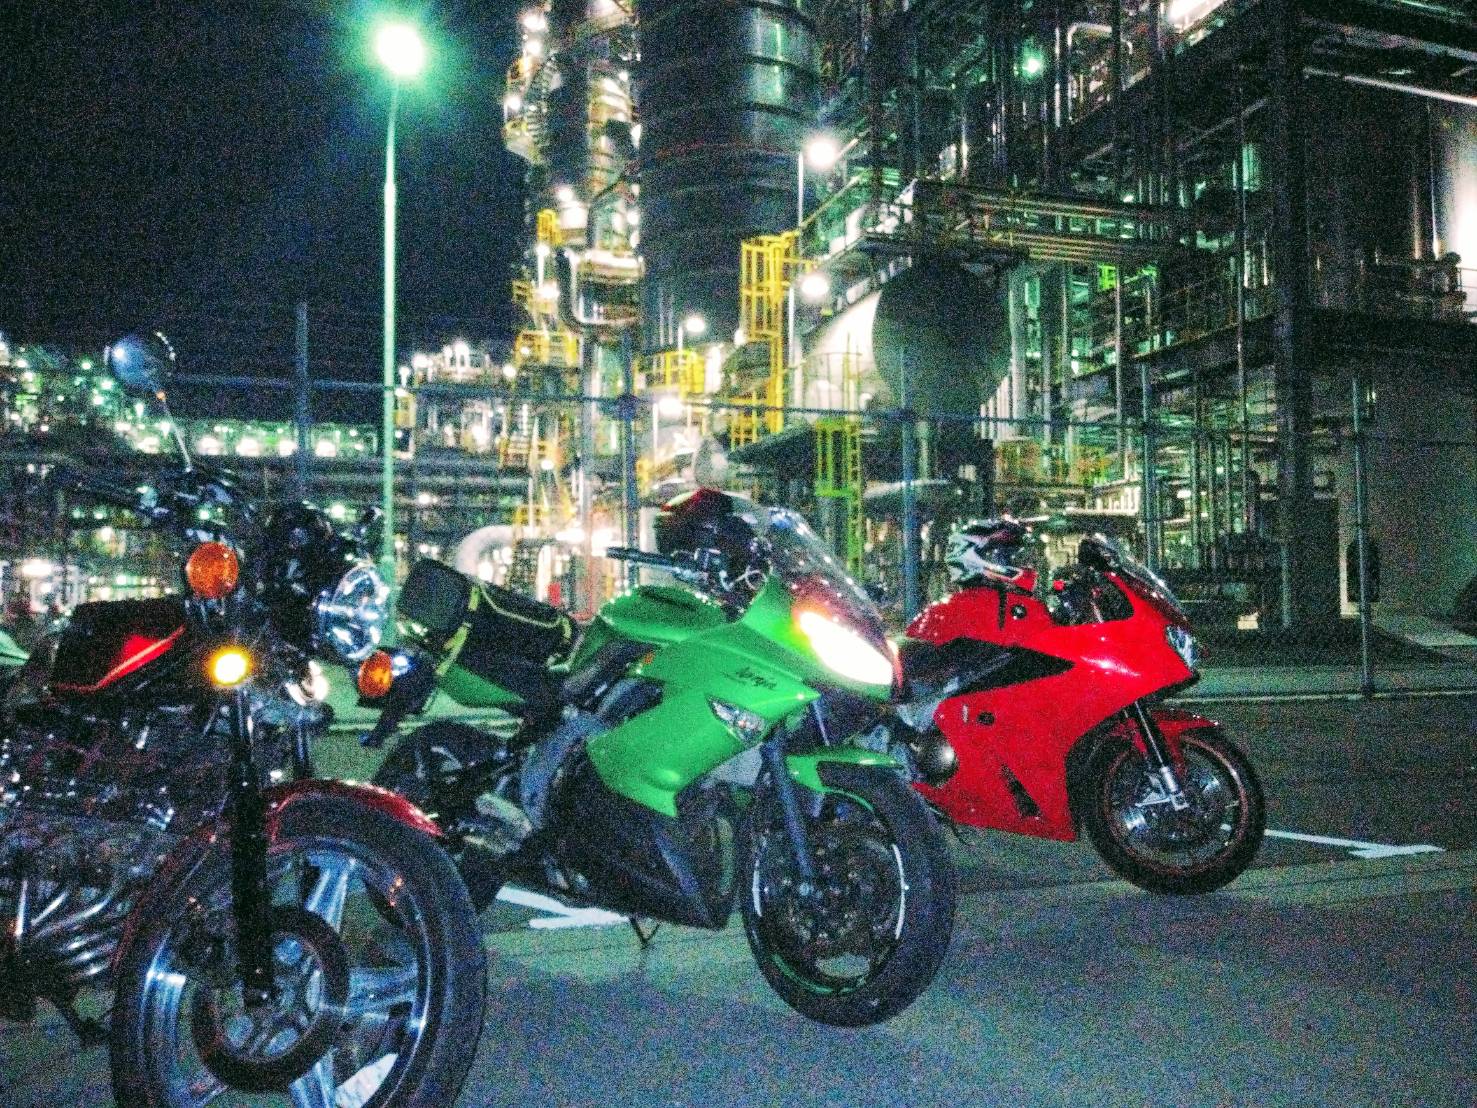 3 bikes and a factory